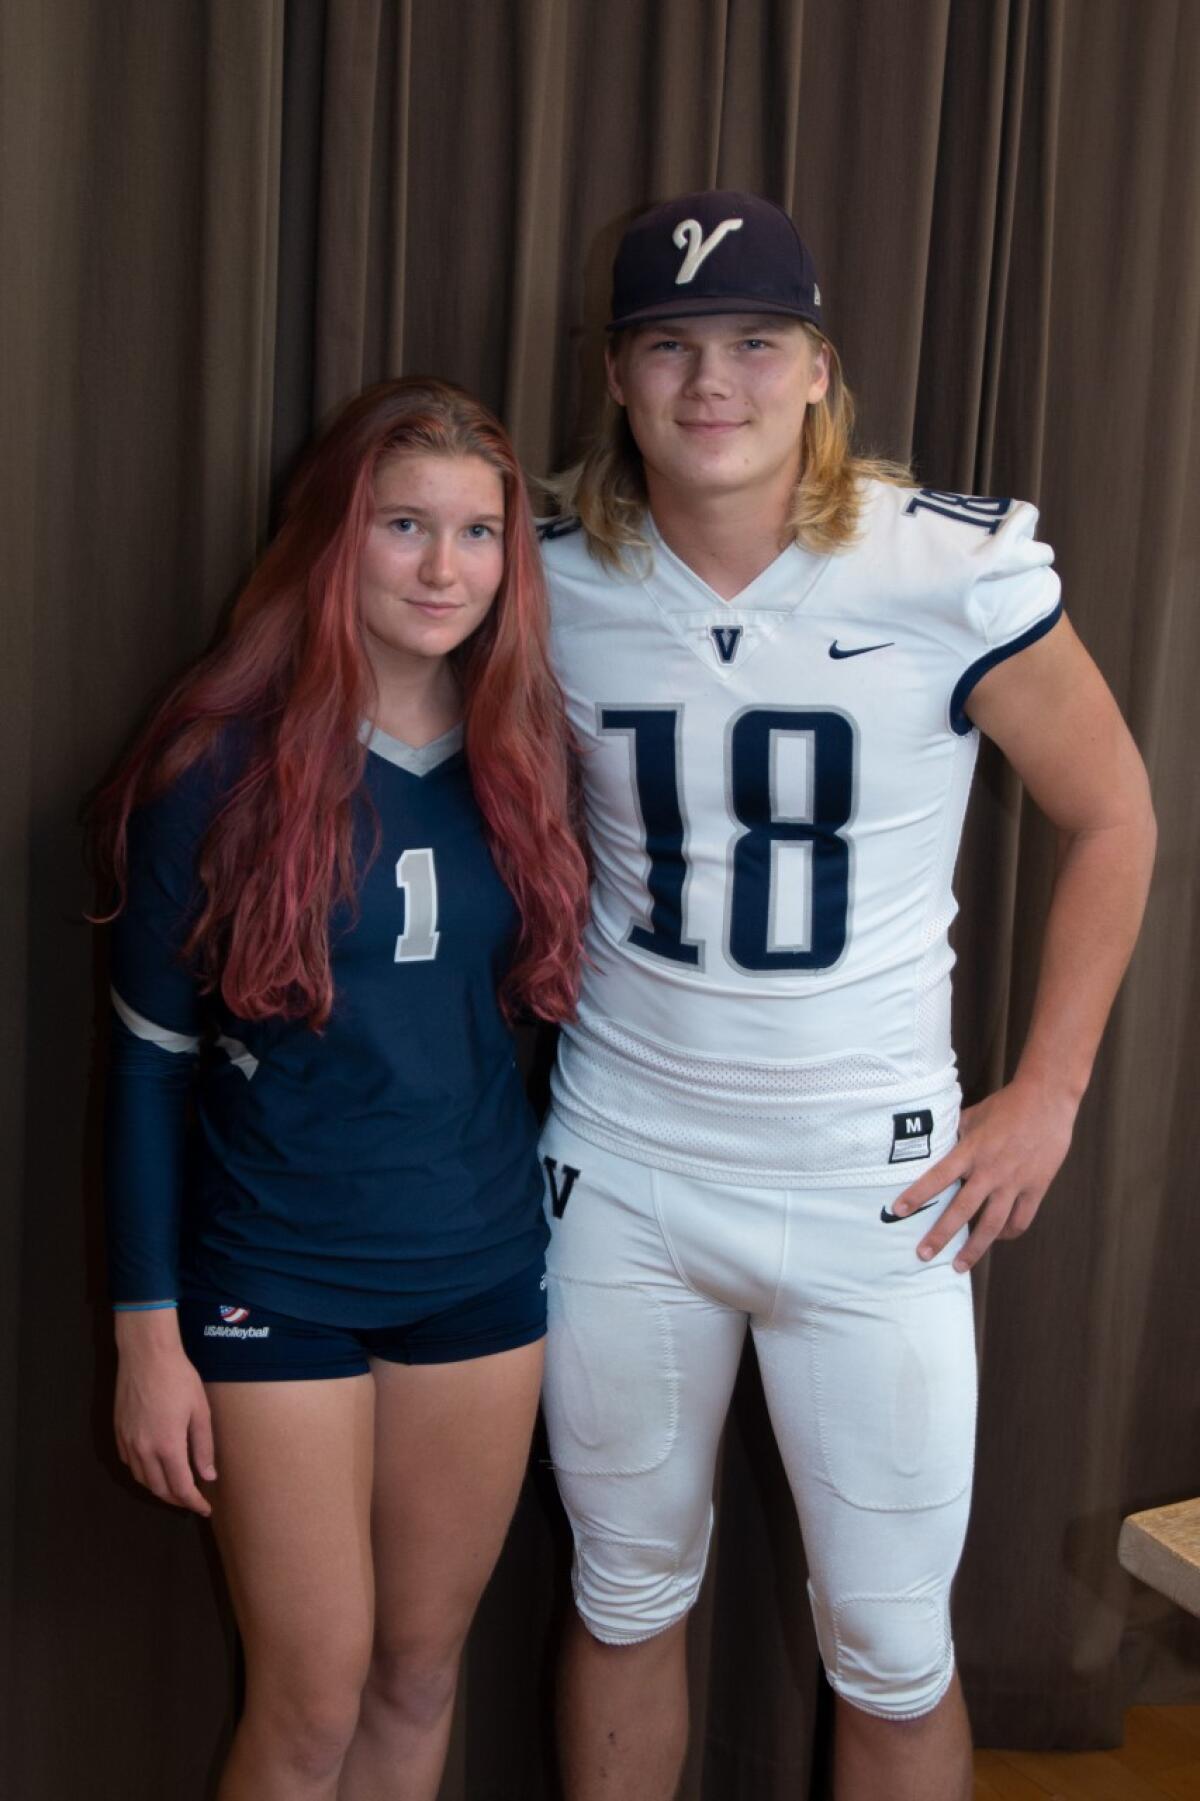 Twins Daniella and Thomas Kensinger pose for a photo in the volleyball and football uniforms.